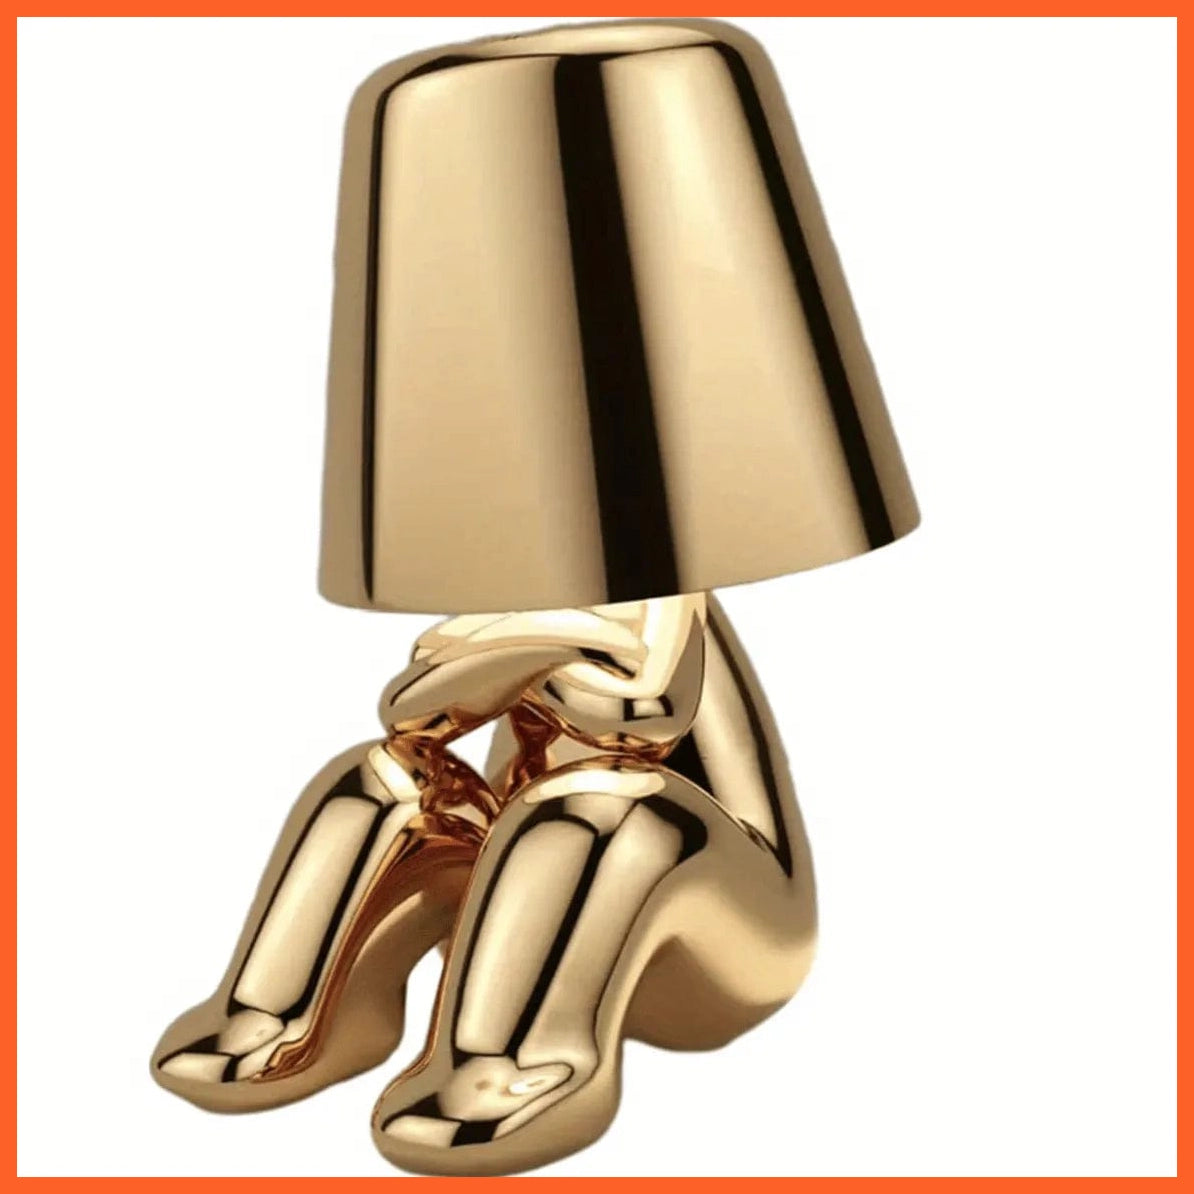 whatagift.com.au Golden Color Thinker Statue LED Table Lamp With USB Port| Nightstand Lamp For Home, Living Room